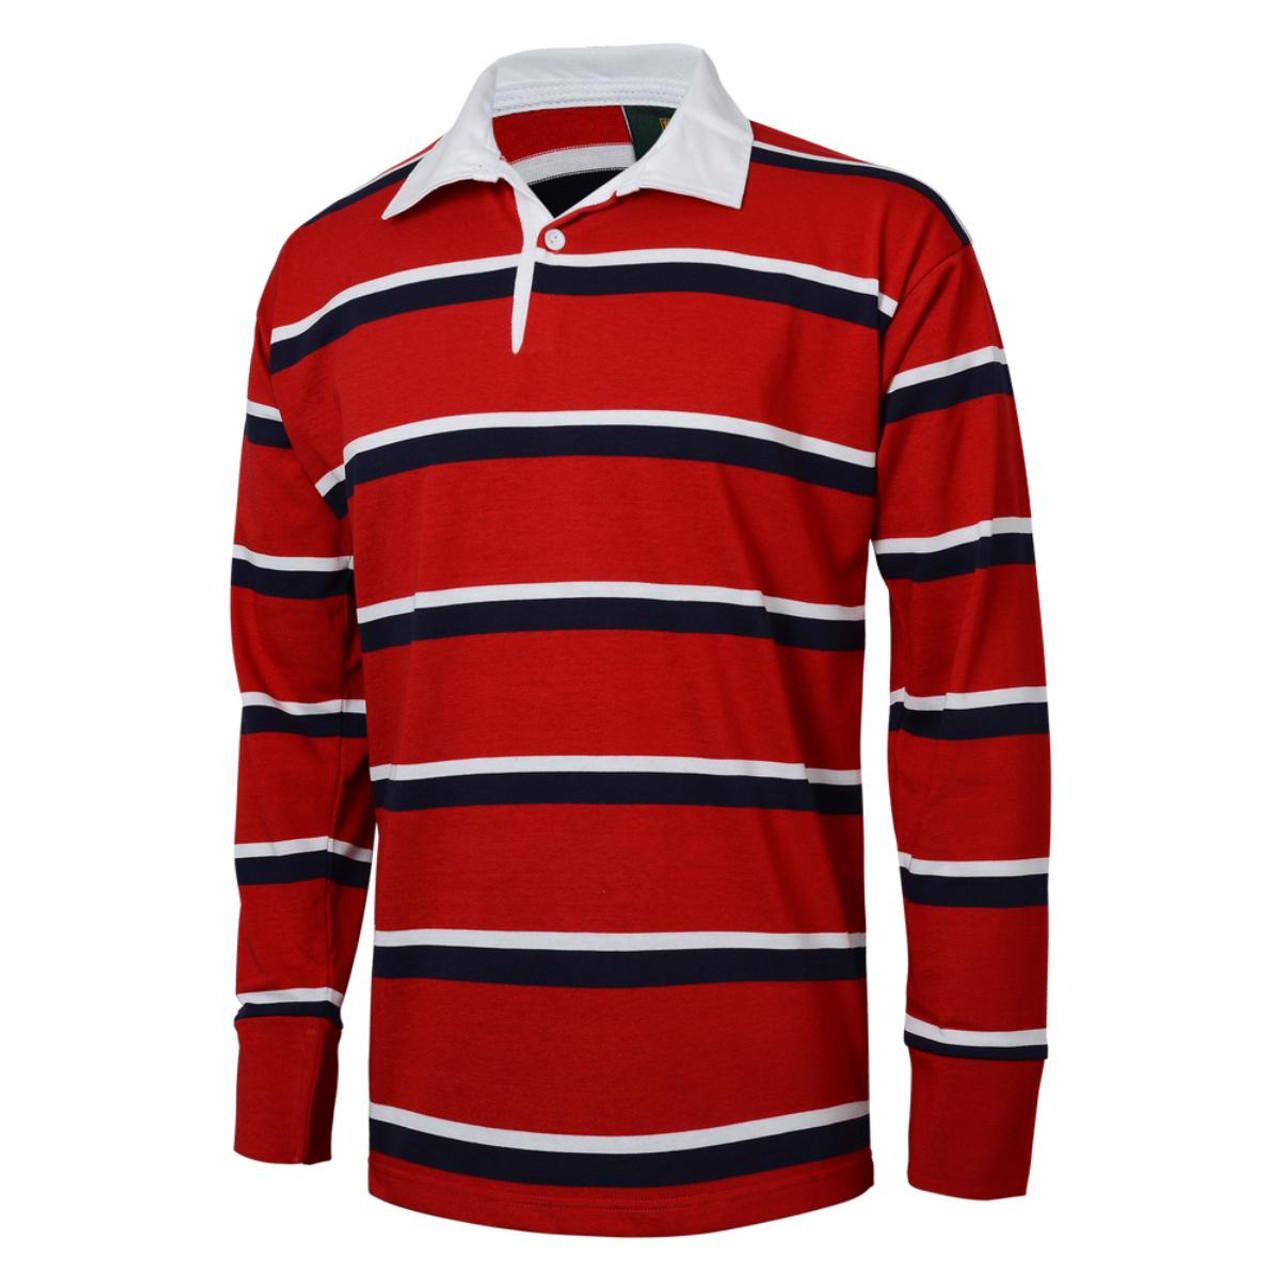 Sydney Roosters 1908 Foundation Jersey - Roosters Shop